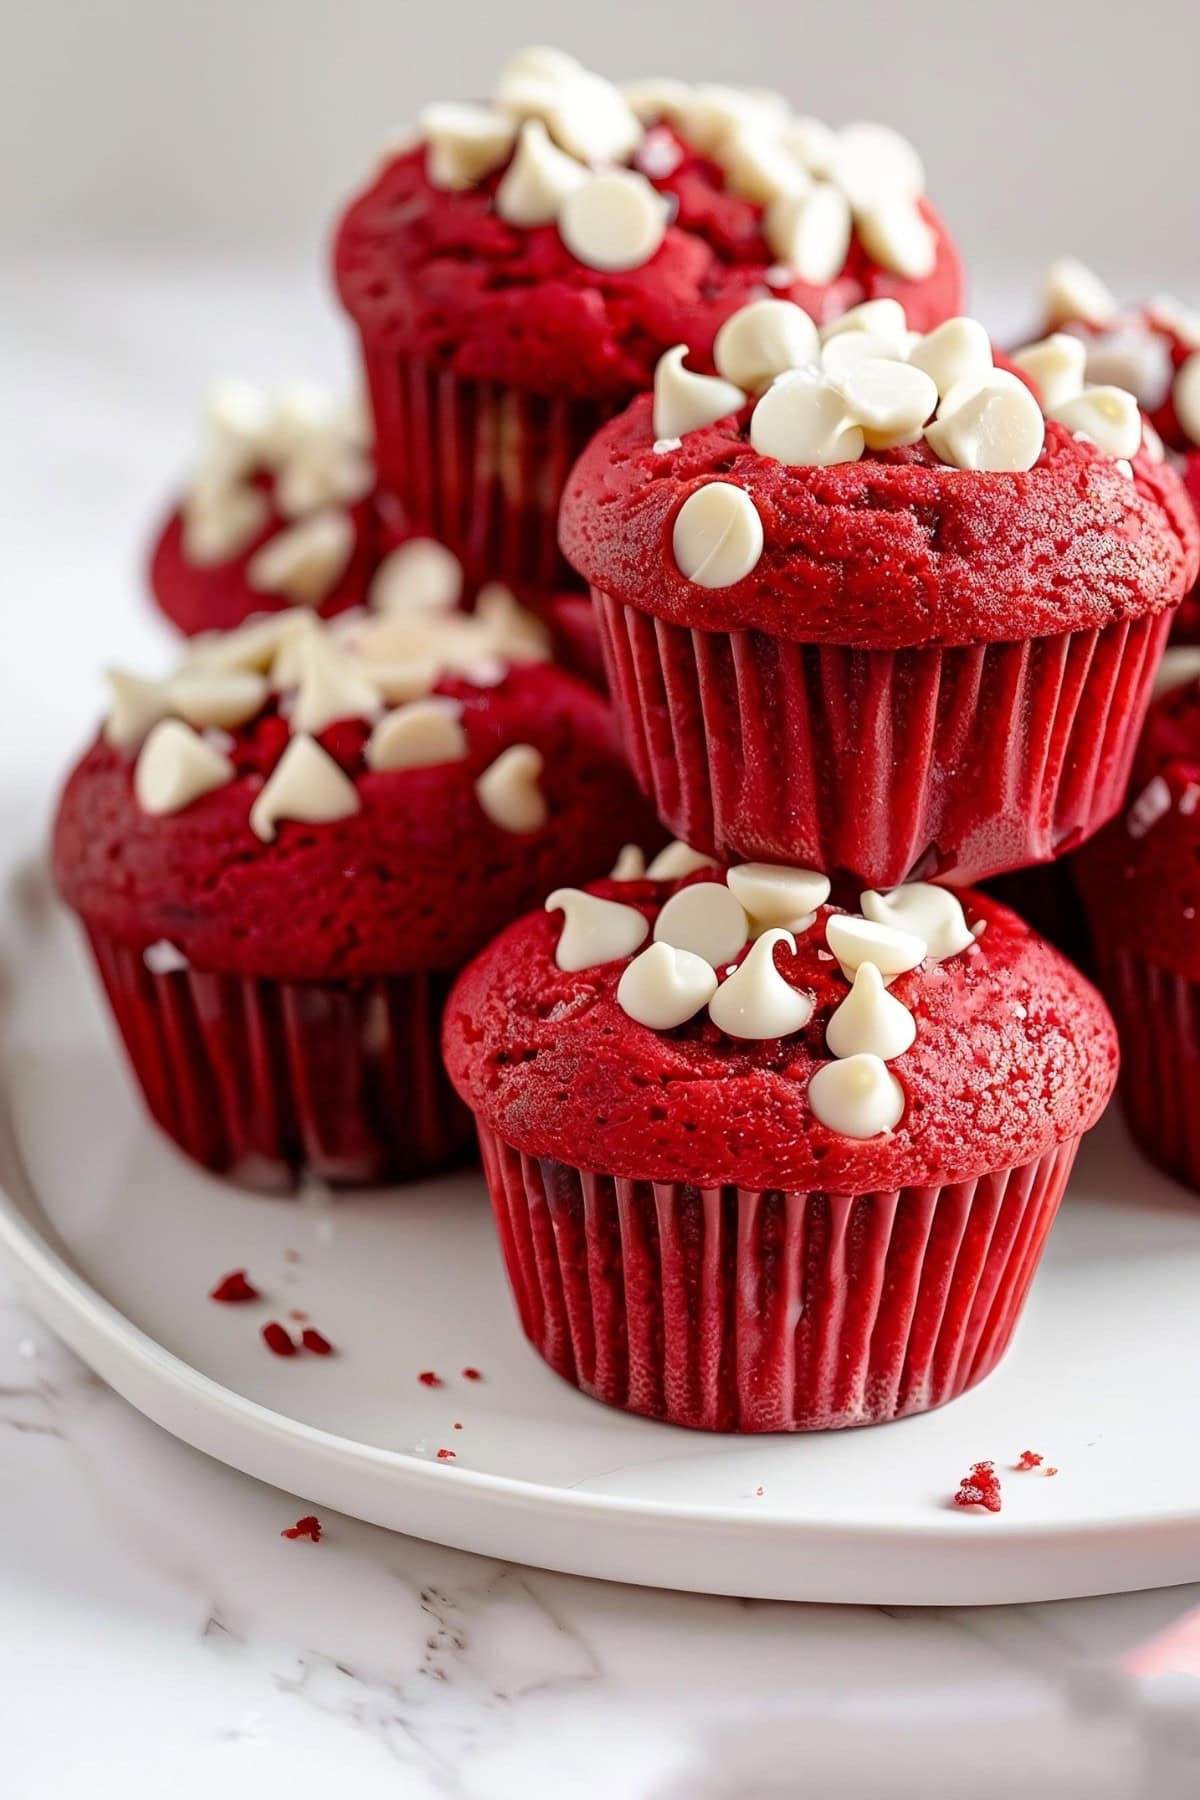 Bunch of red velvet muffins with white mini chocolate chips served on a white plate.